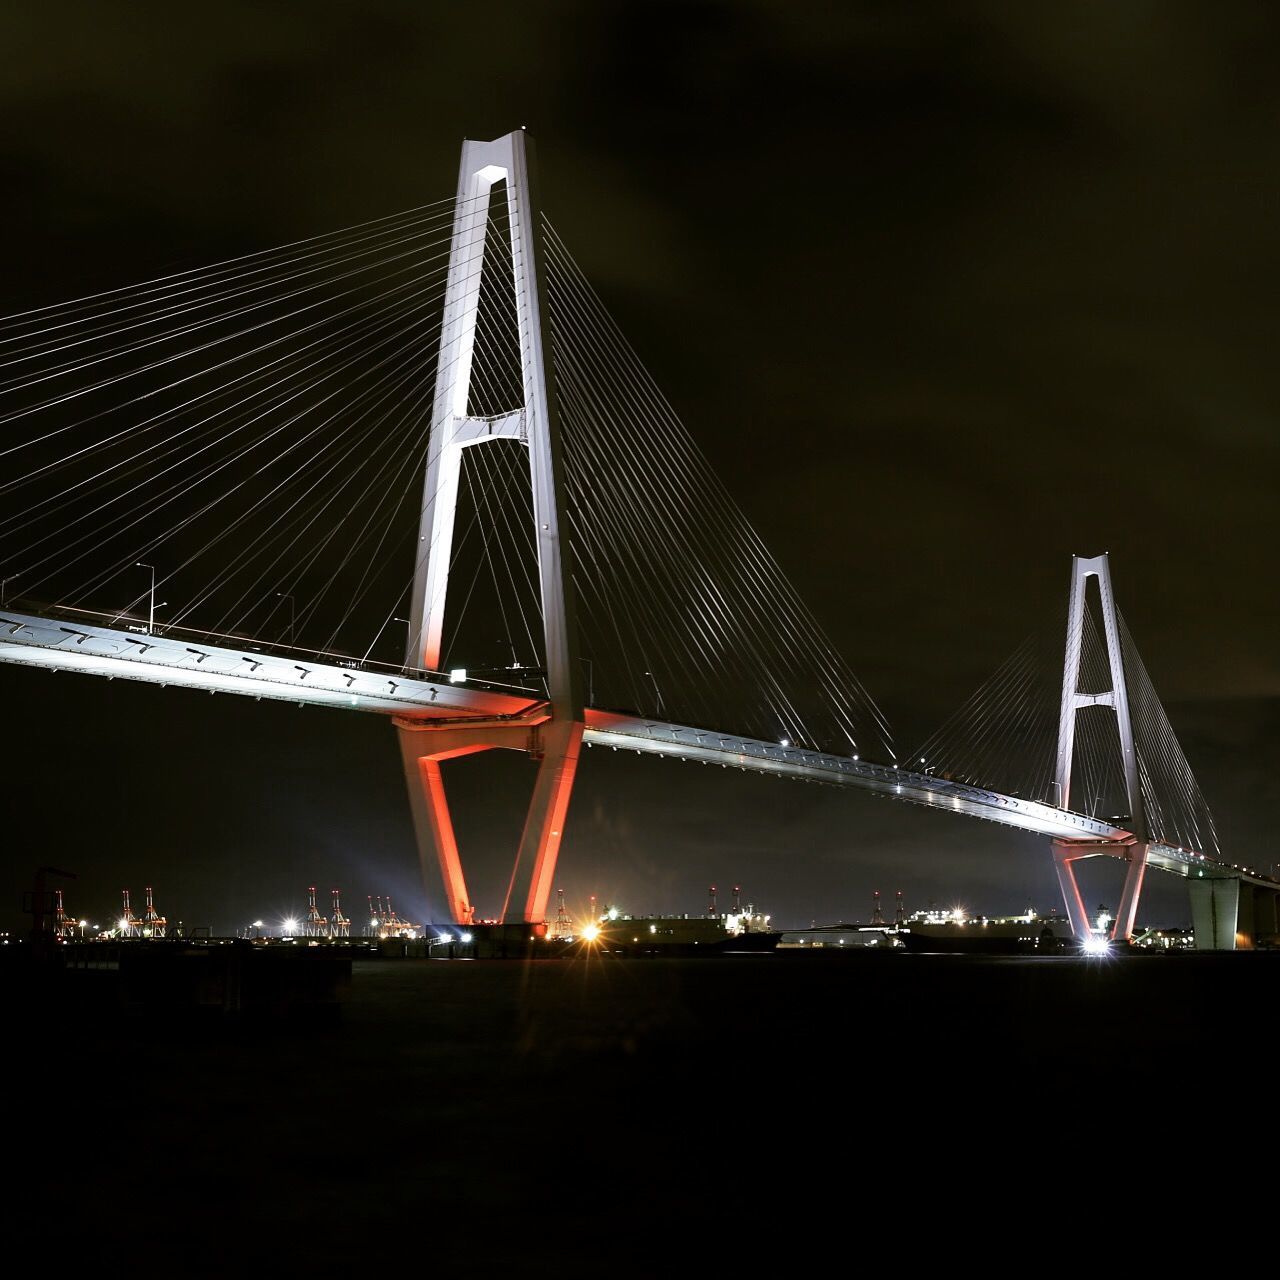 night, illuminated, suspension bridge, built structure, connection, engineering, bridge - man made structure, architecture, sky, transportation, metal, travel destinations, low angle view, cable-stayed bridge, development, city, travel, famous place, river, capital cities